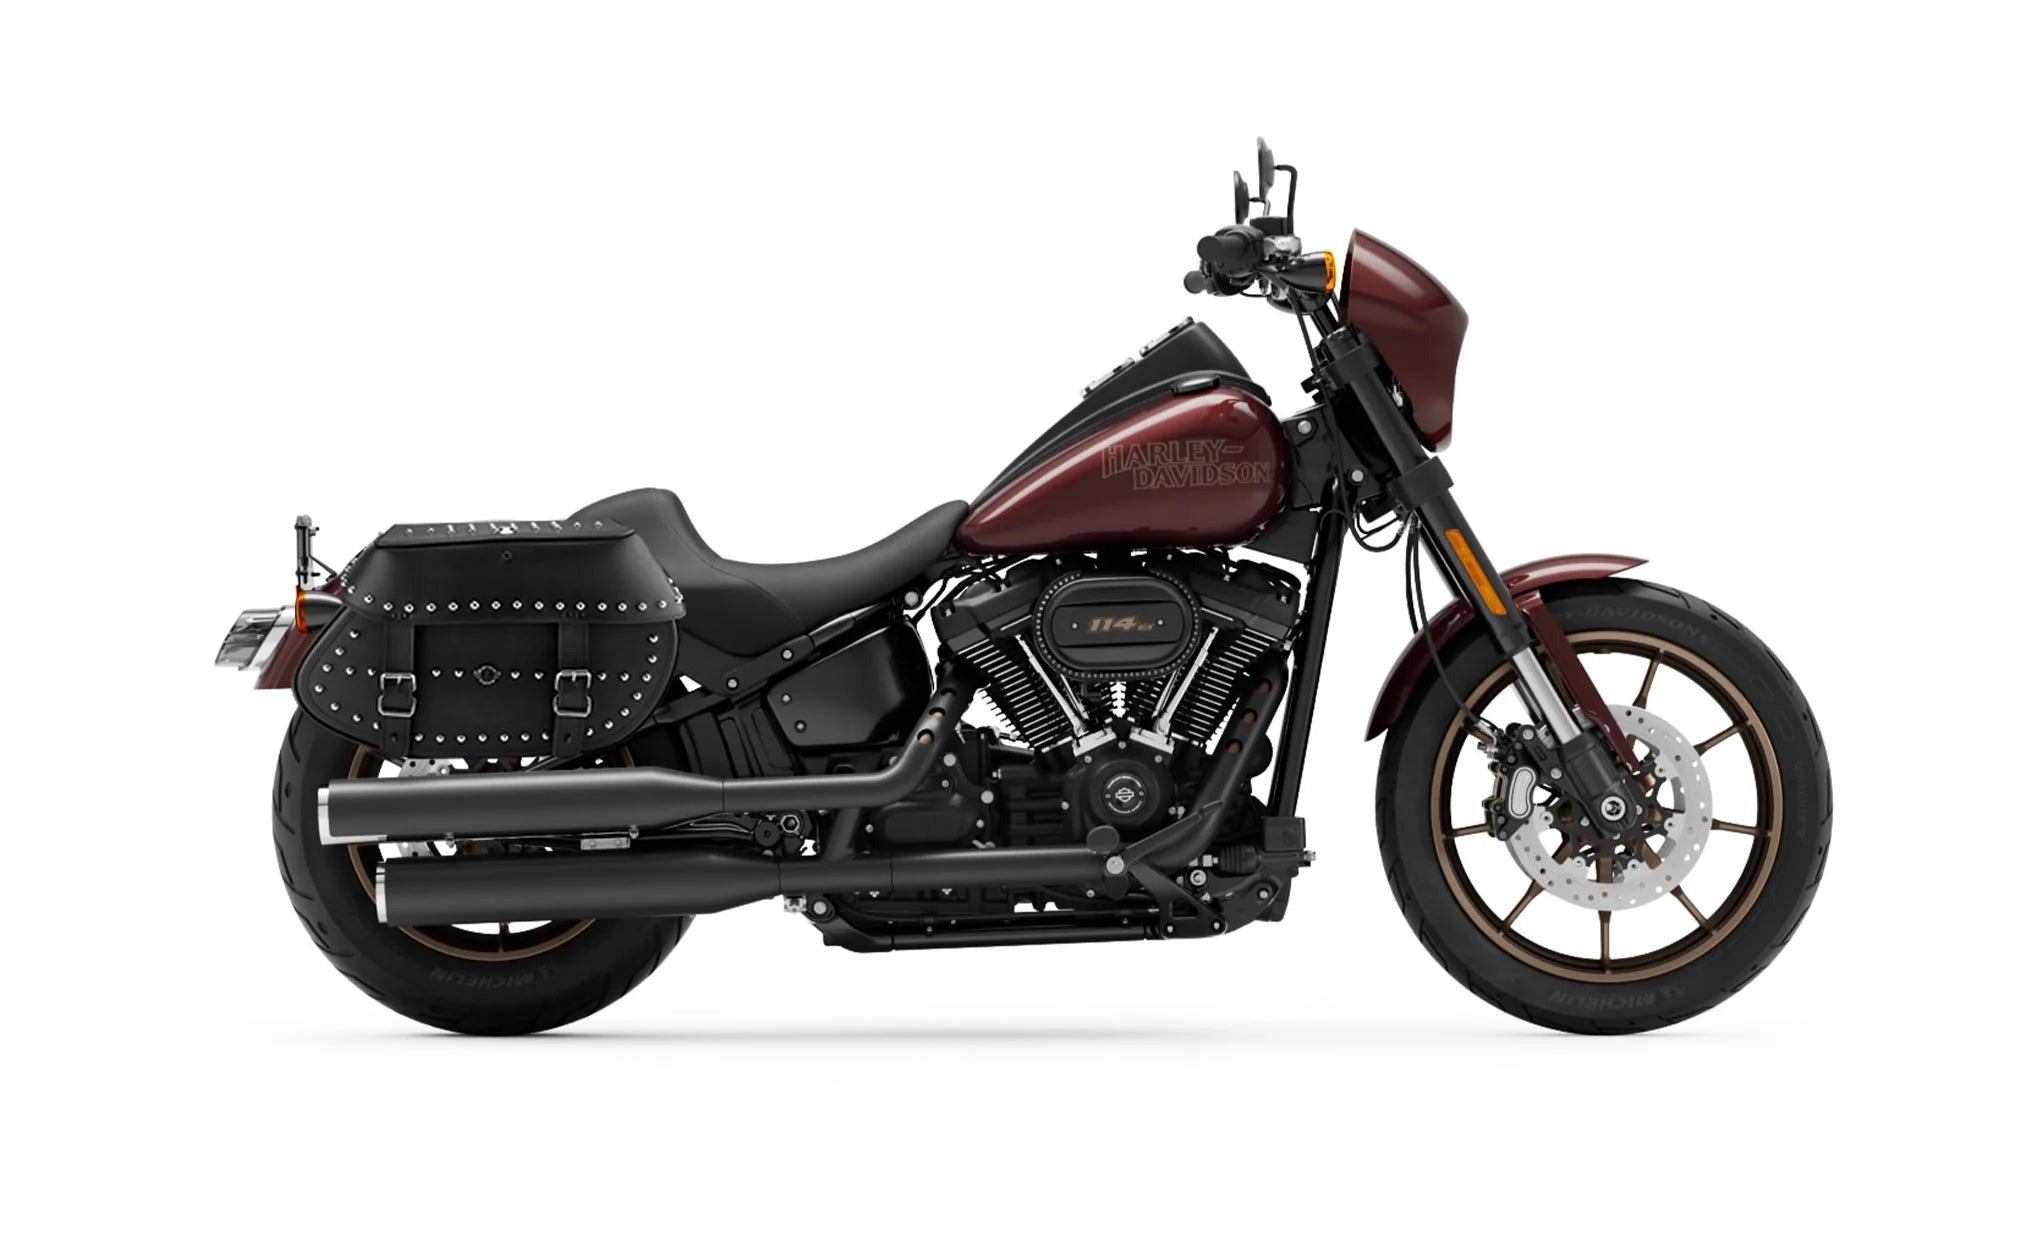 Viking Legacy Extra Large Studded Leather Motorcycle Saddlebags For Harley Softail Low Rider S Fxlrs on Bike Photo @expand